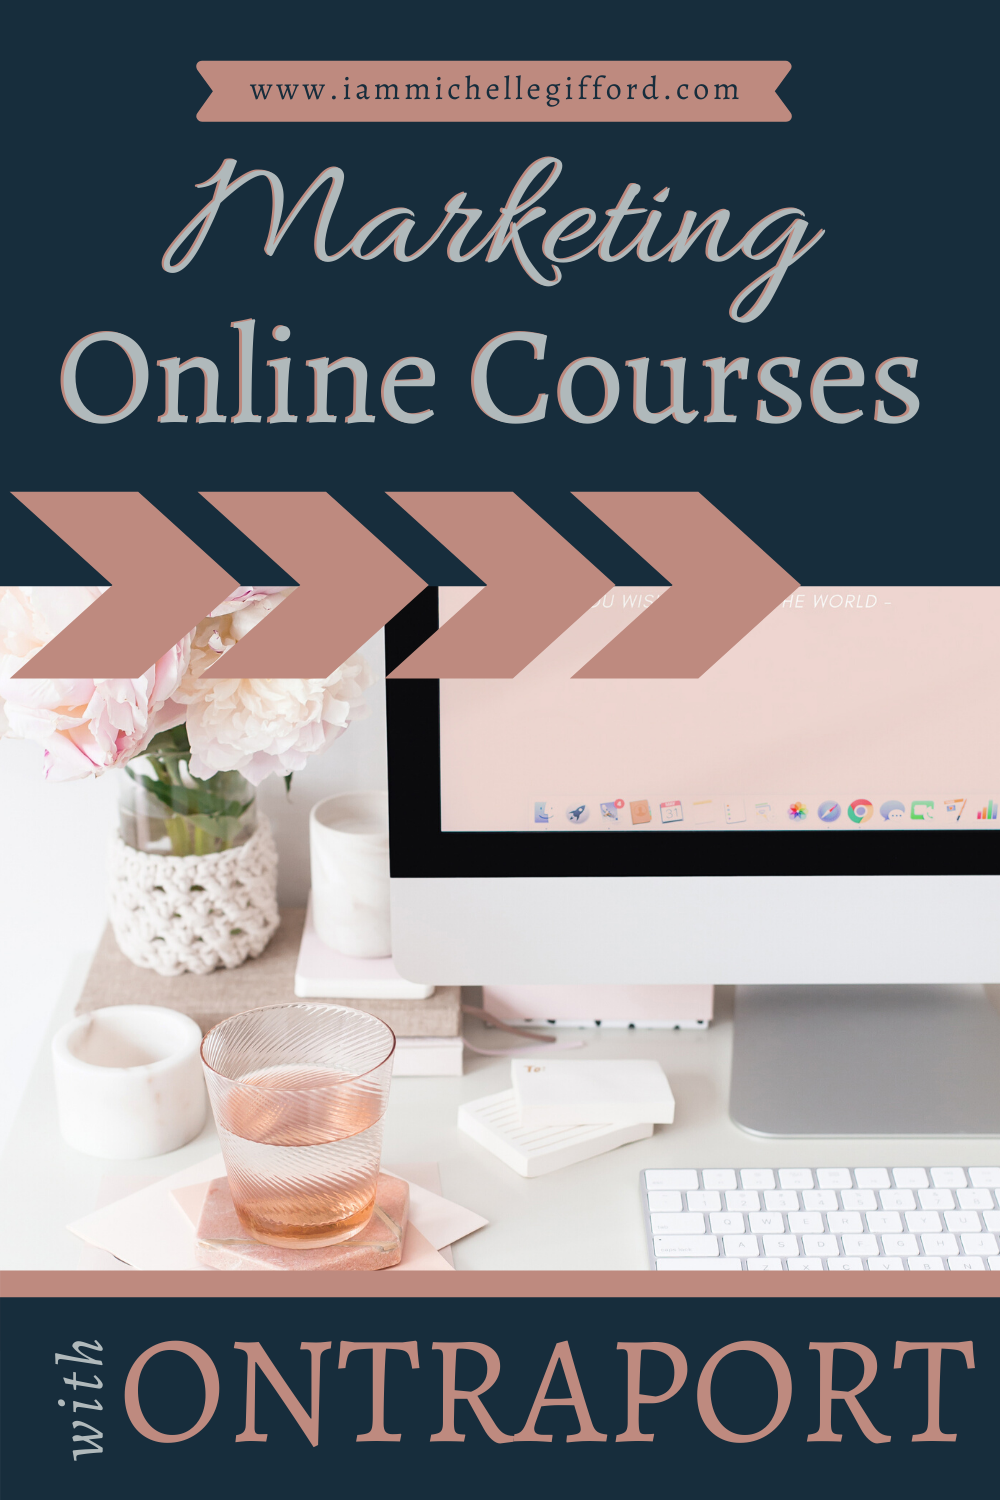 How I Sell My Courses with Ontraport-Marketing Online Courses www.iammichellegifford.com